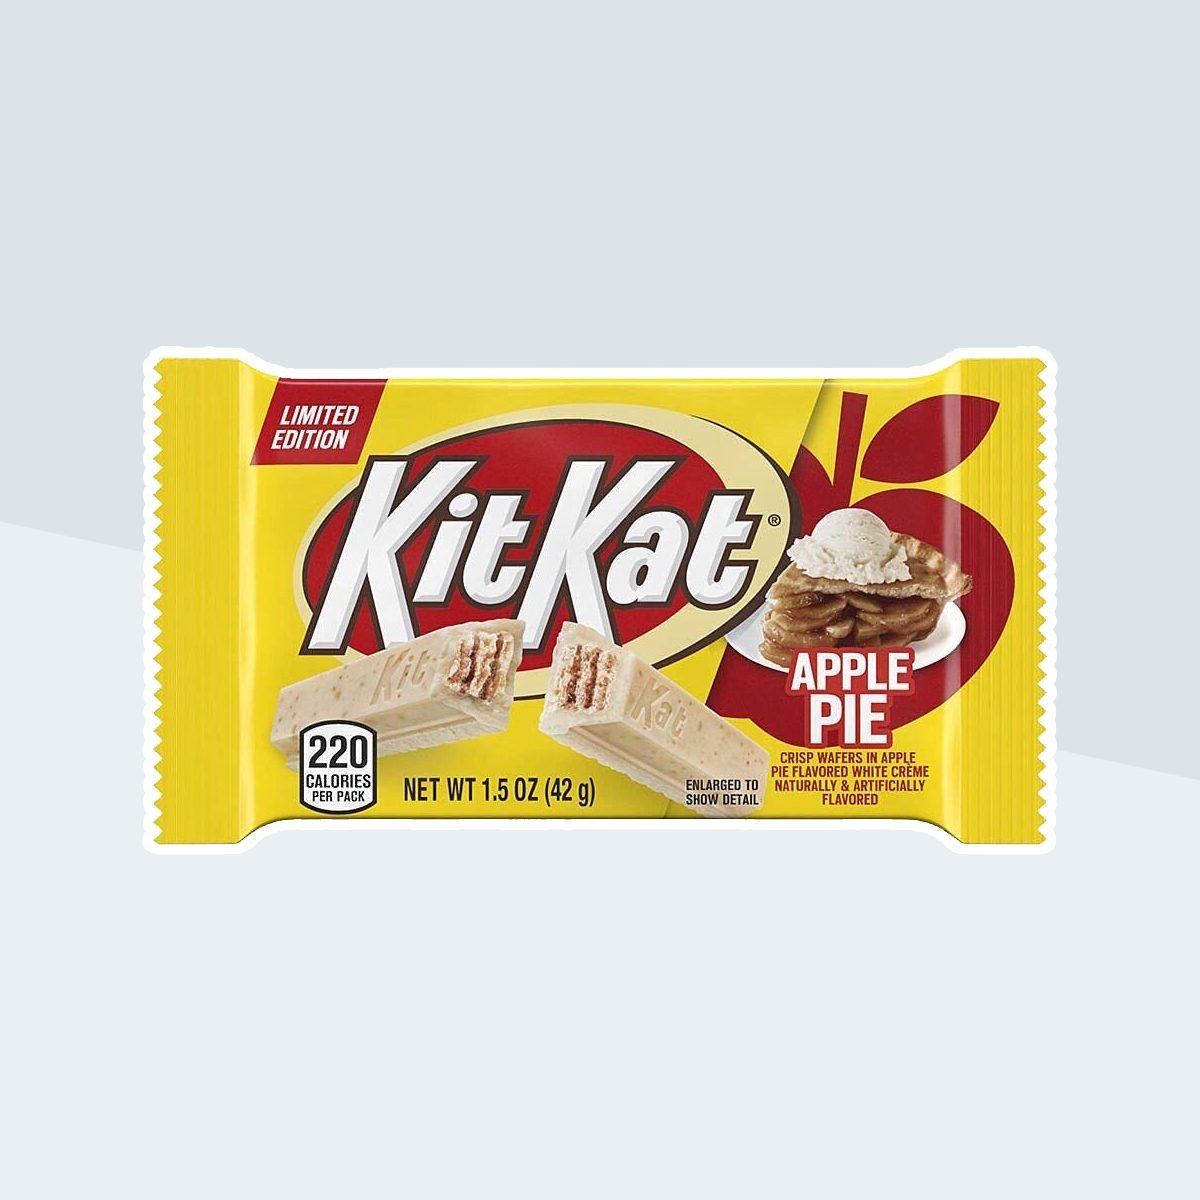 Pumpkin Pie Kit Kats are Here for Fall